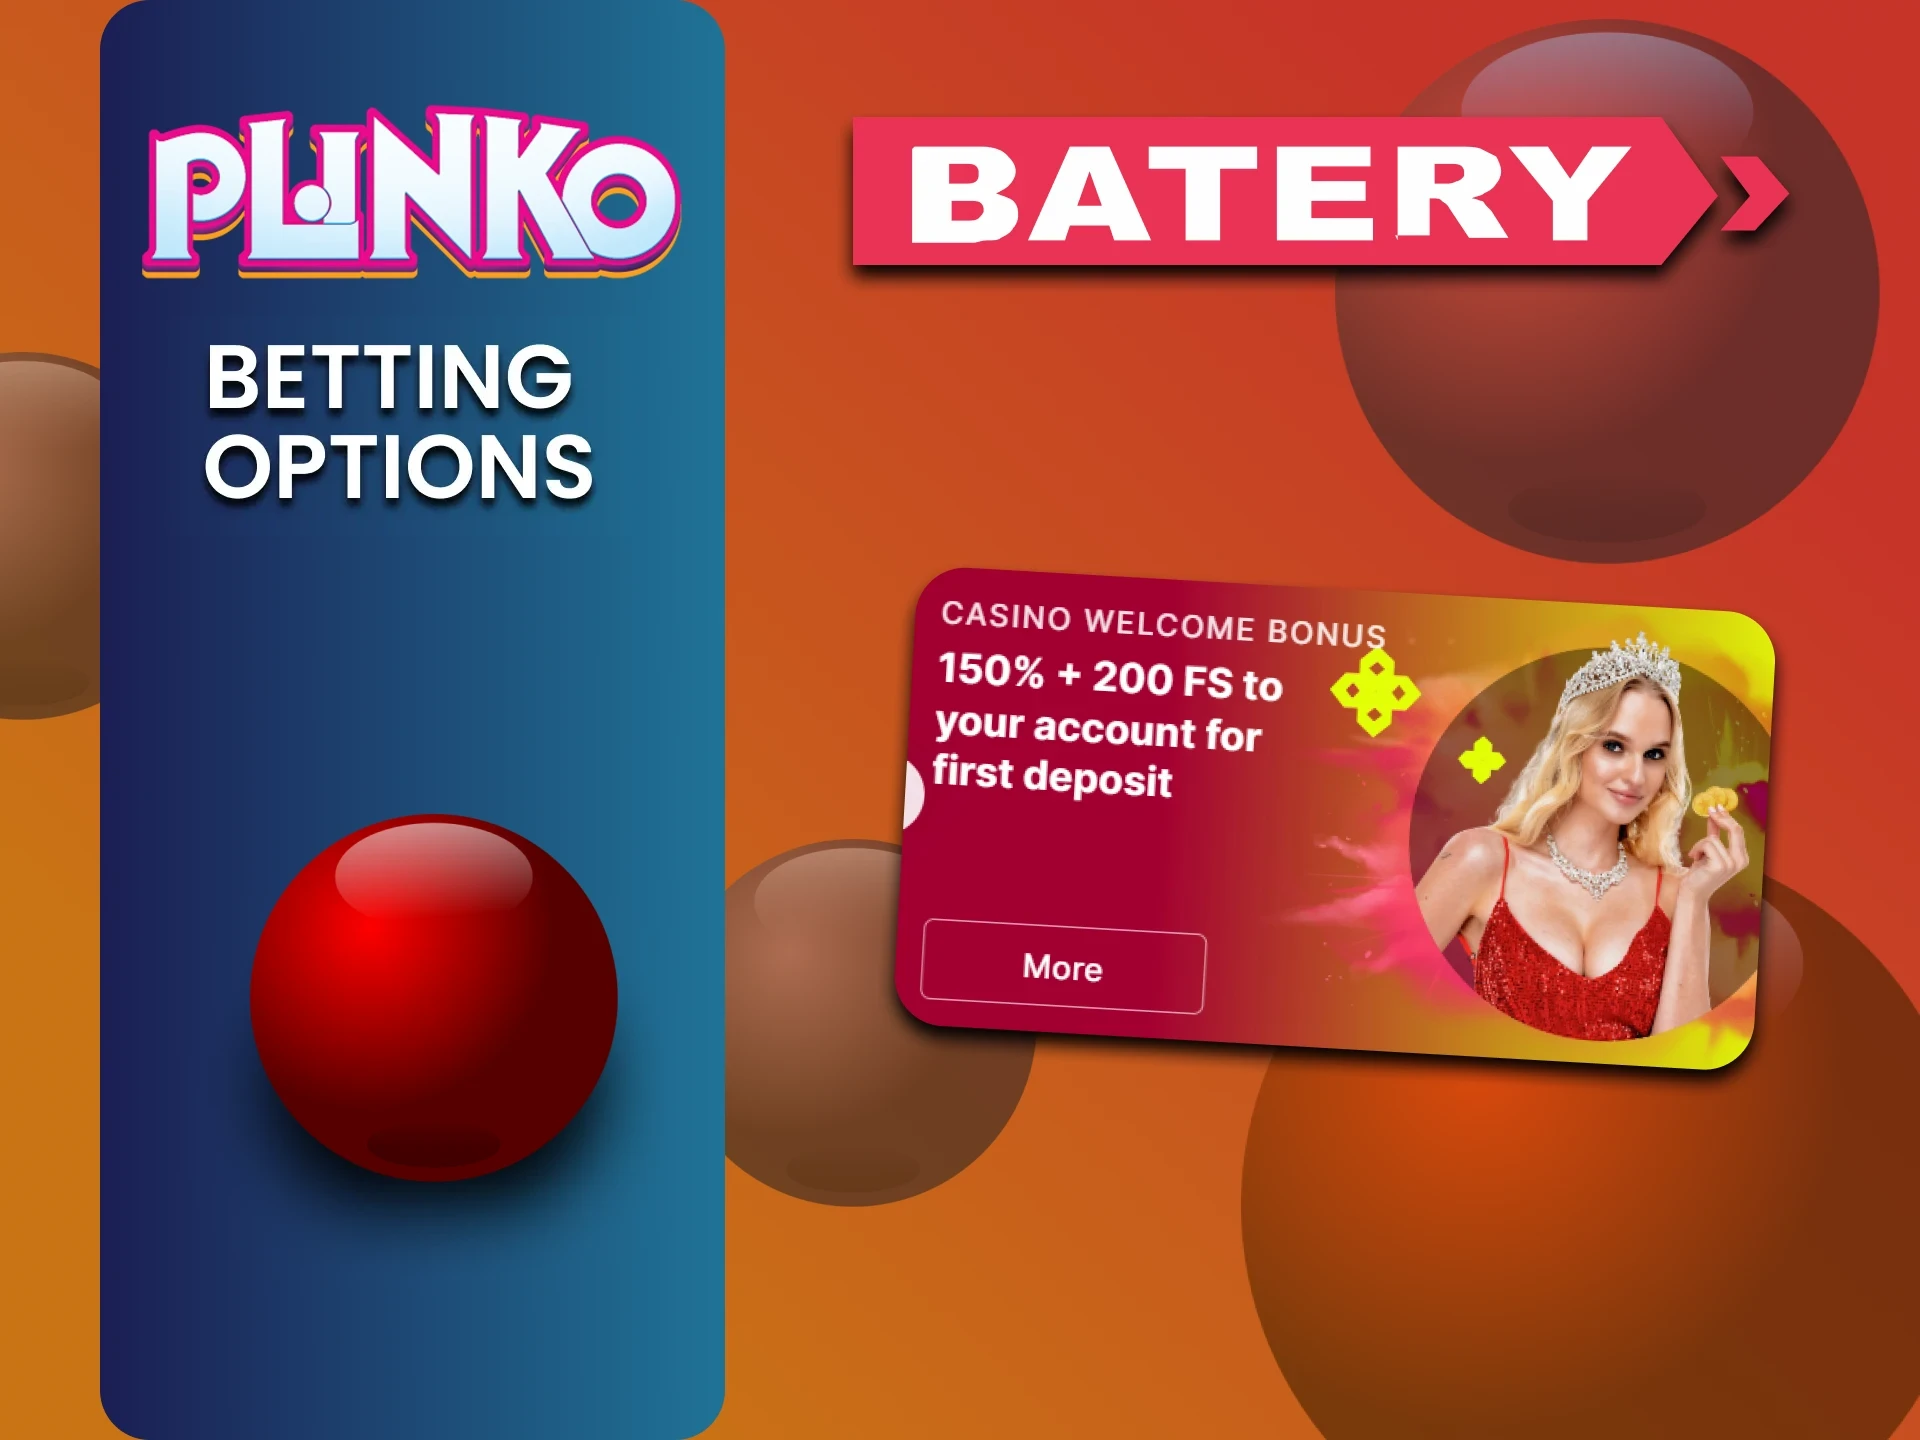 Play Plinko on Batery and get a welcome bonus.